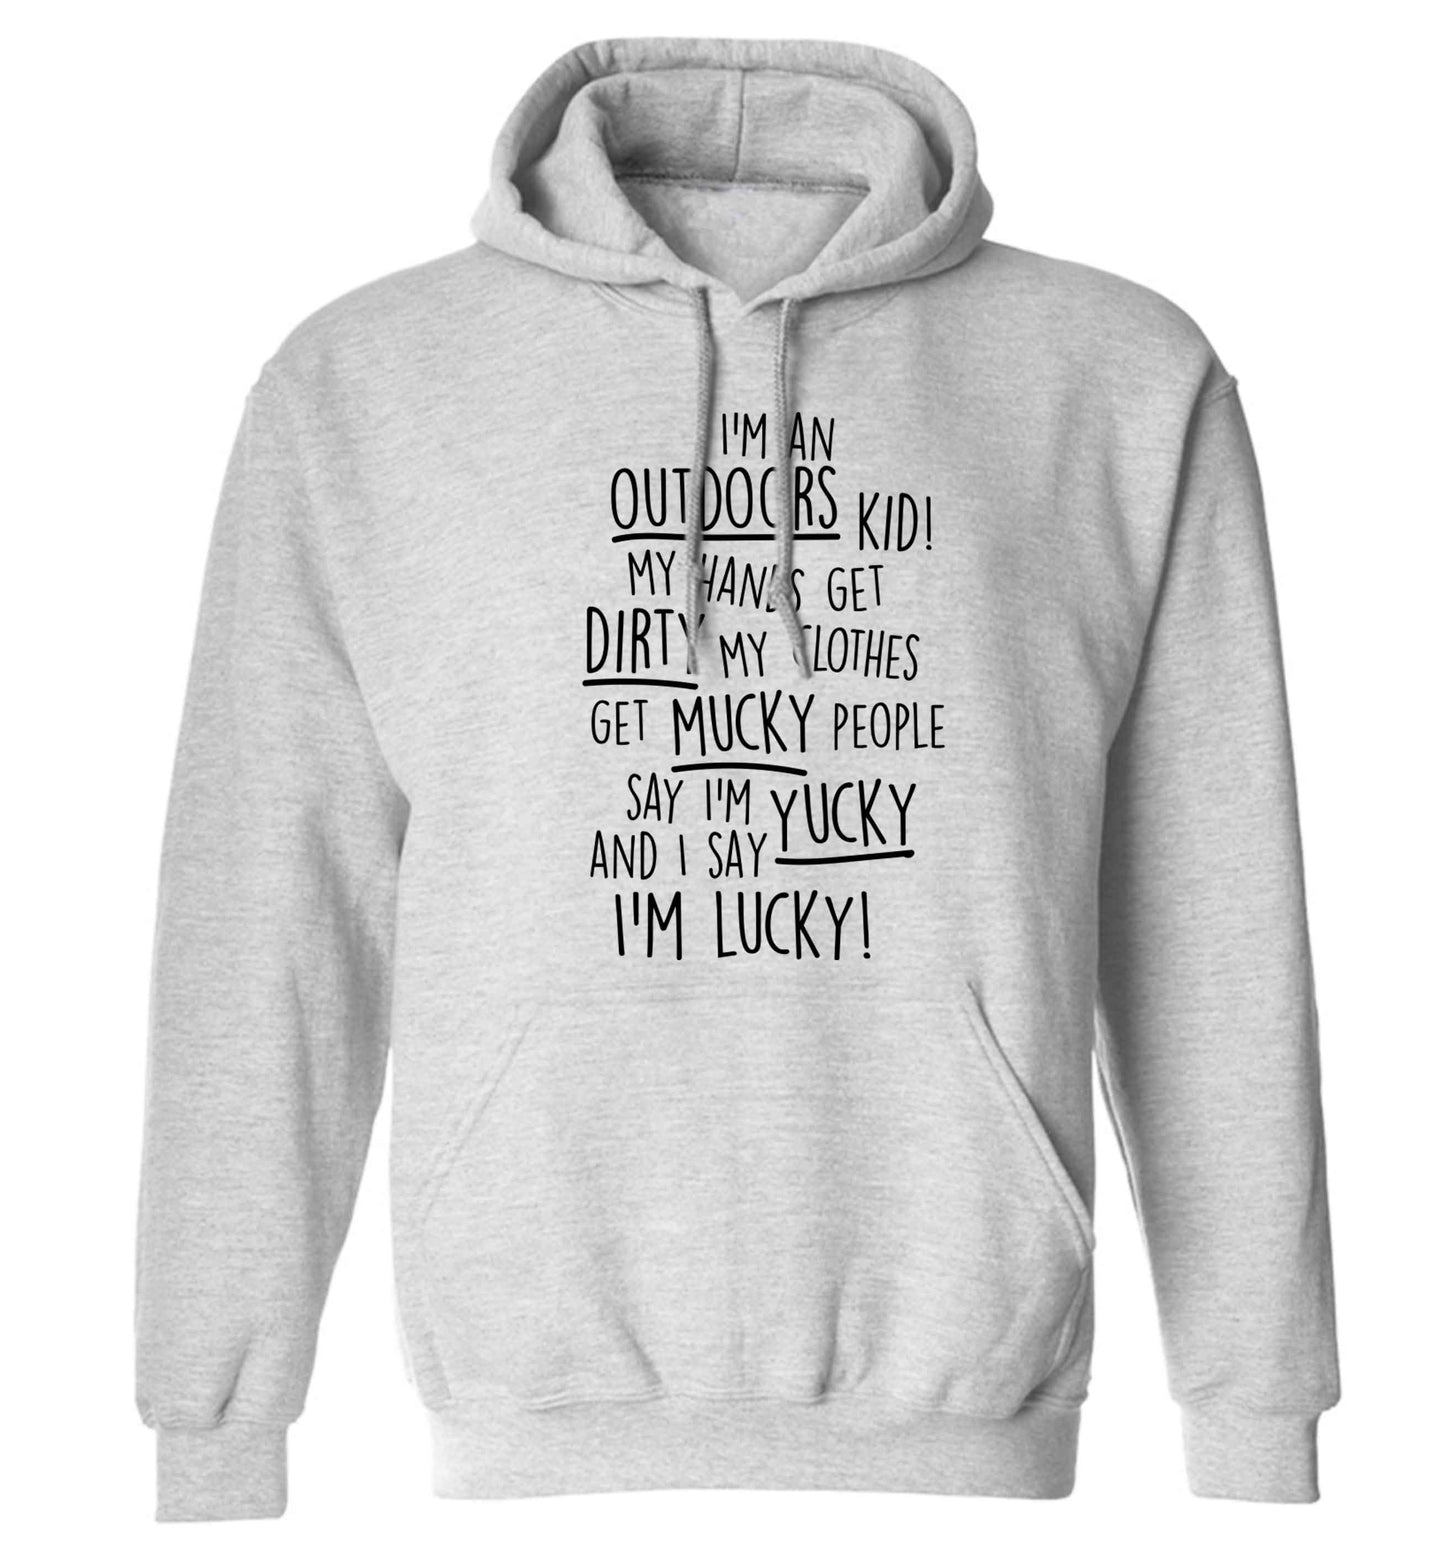 I'm an outdoors kid poem adults unisex grey hoodie 2XL